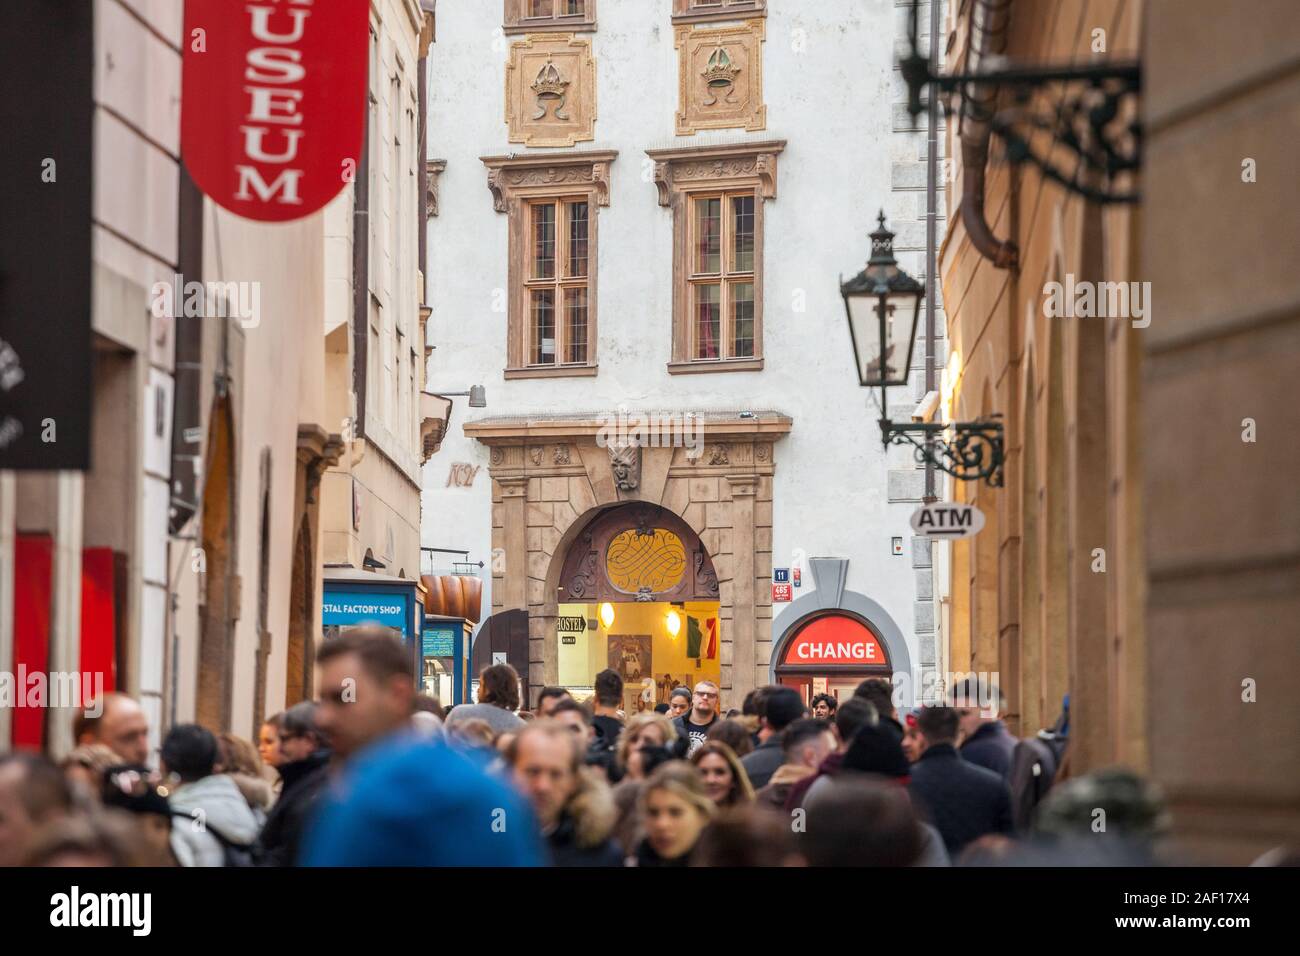 PRAGUE, CZECHIA - NOVEMBER 3, 2019: Crowd of tourists passing by and rushing in a narrow street being overpopulated in the medieval old town of Vienna Stock Photo